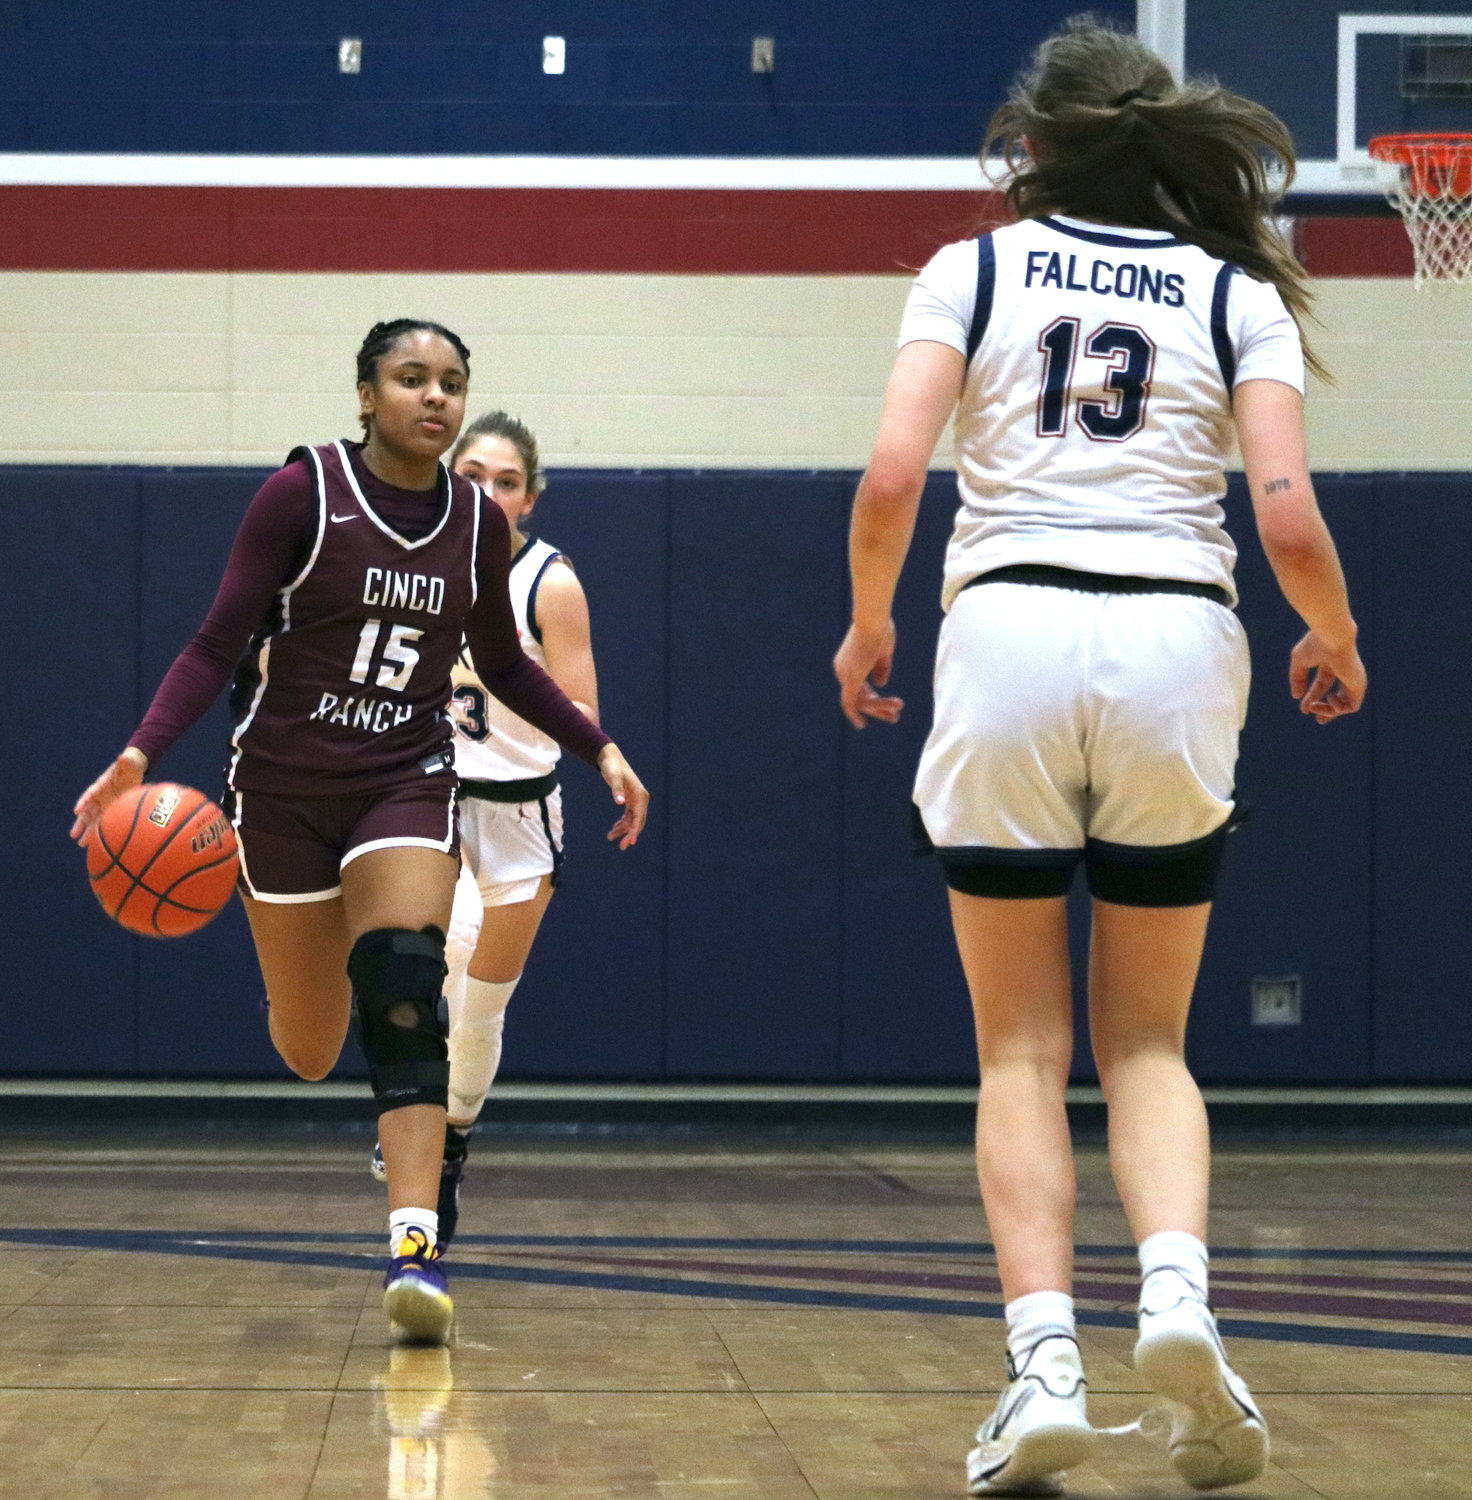 Danielle Williams dribbles up court during Friday’s game between Tompkins and Cinco Ranch at the Tompkins gym.